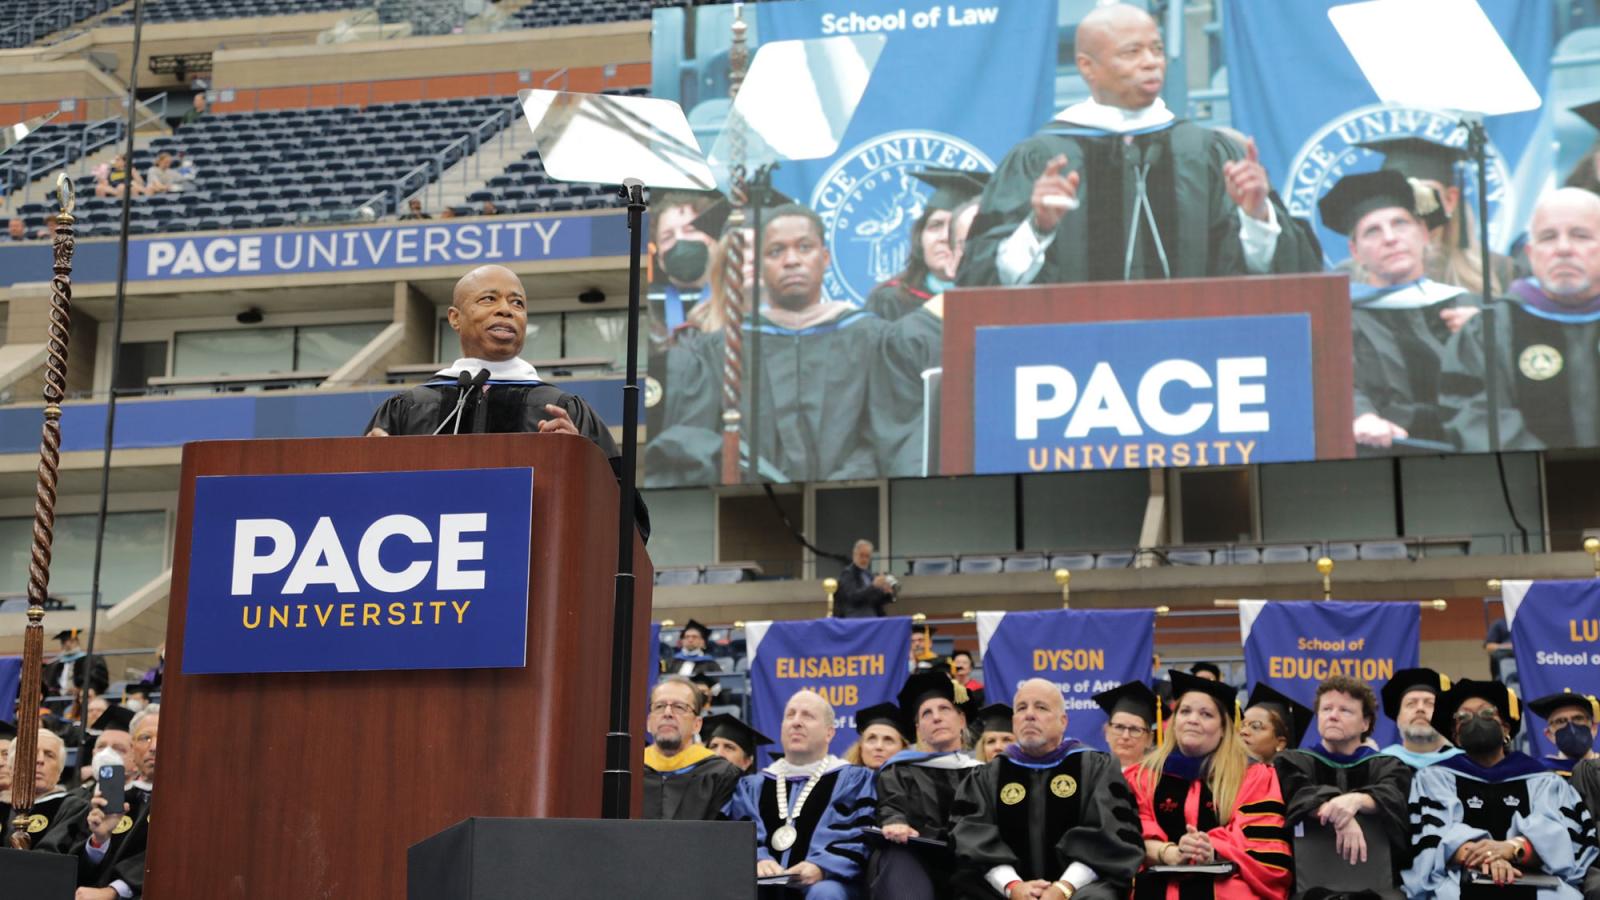 NYC Mayor Eric Adams addressing the crowd at the Pace University Commencement ceremony.